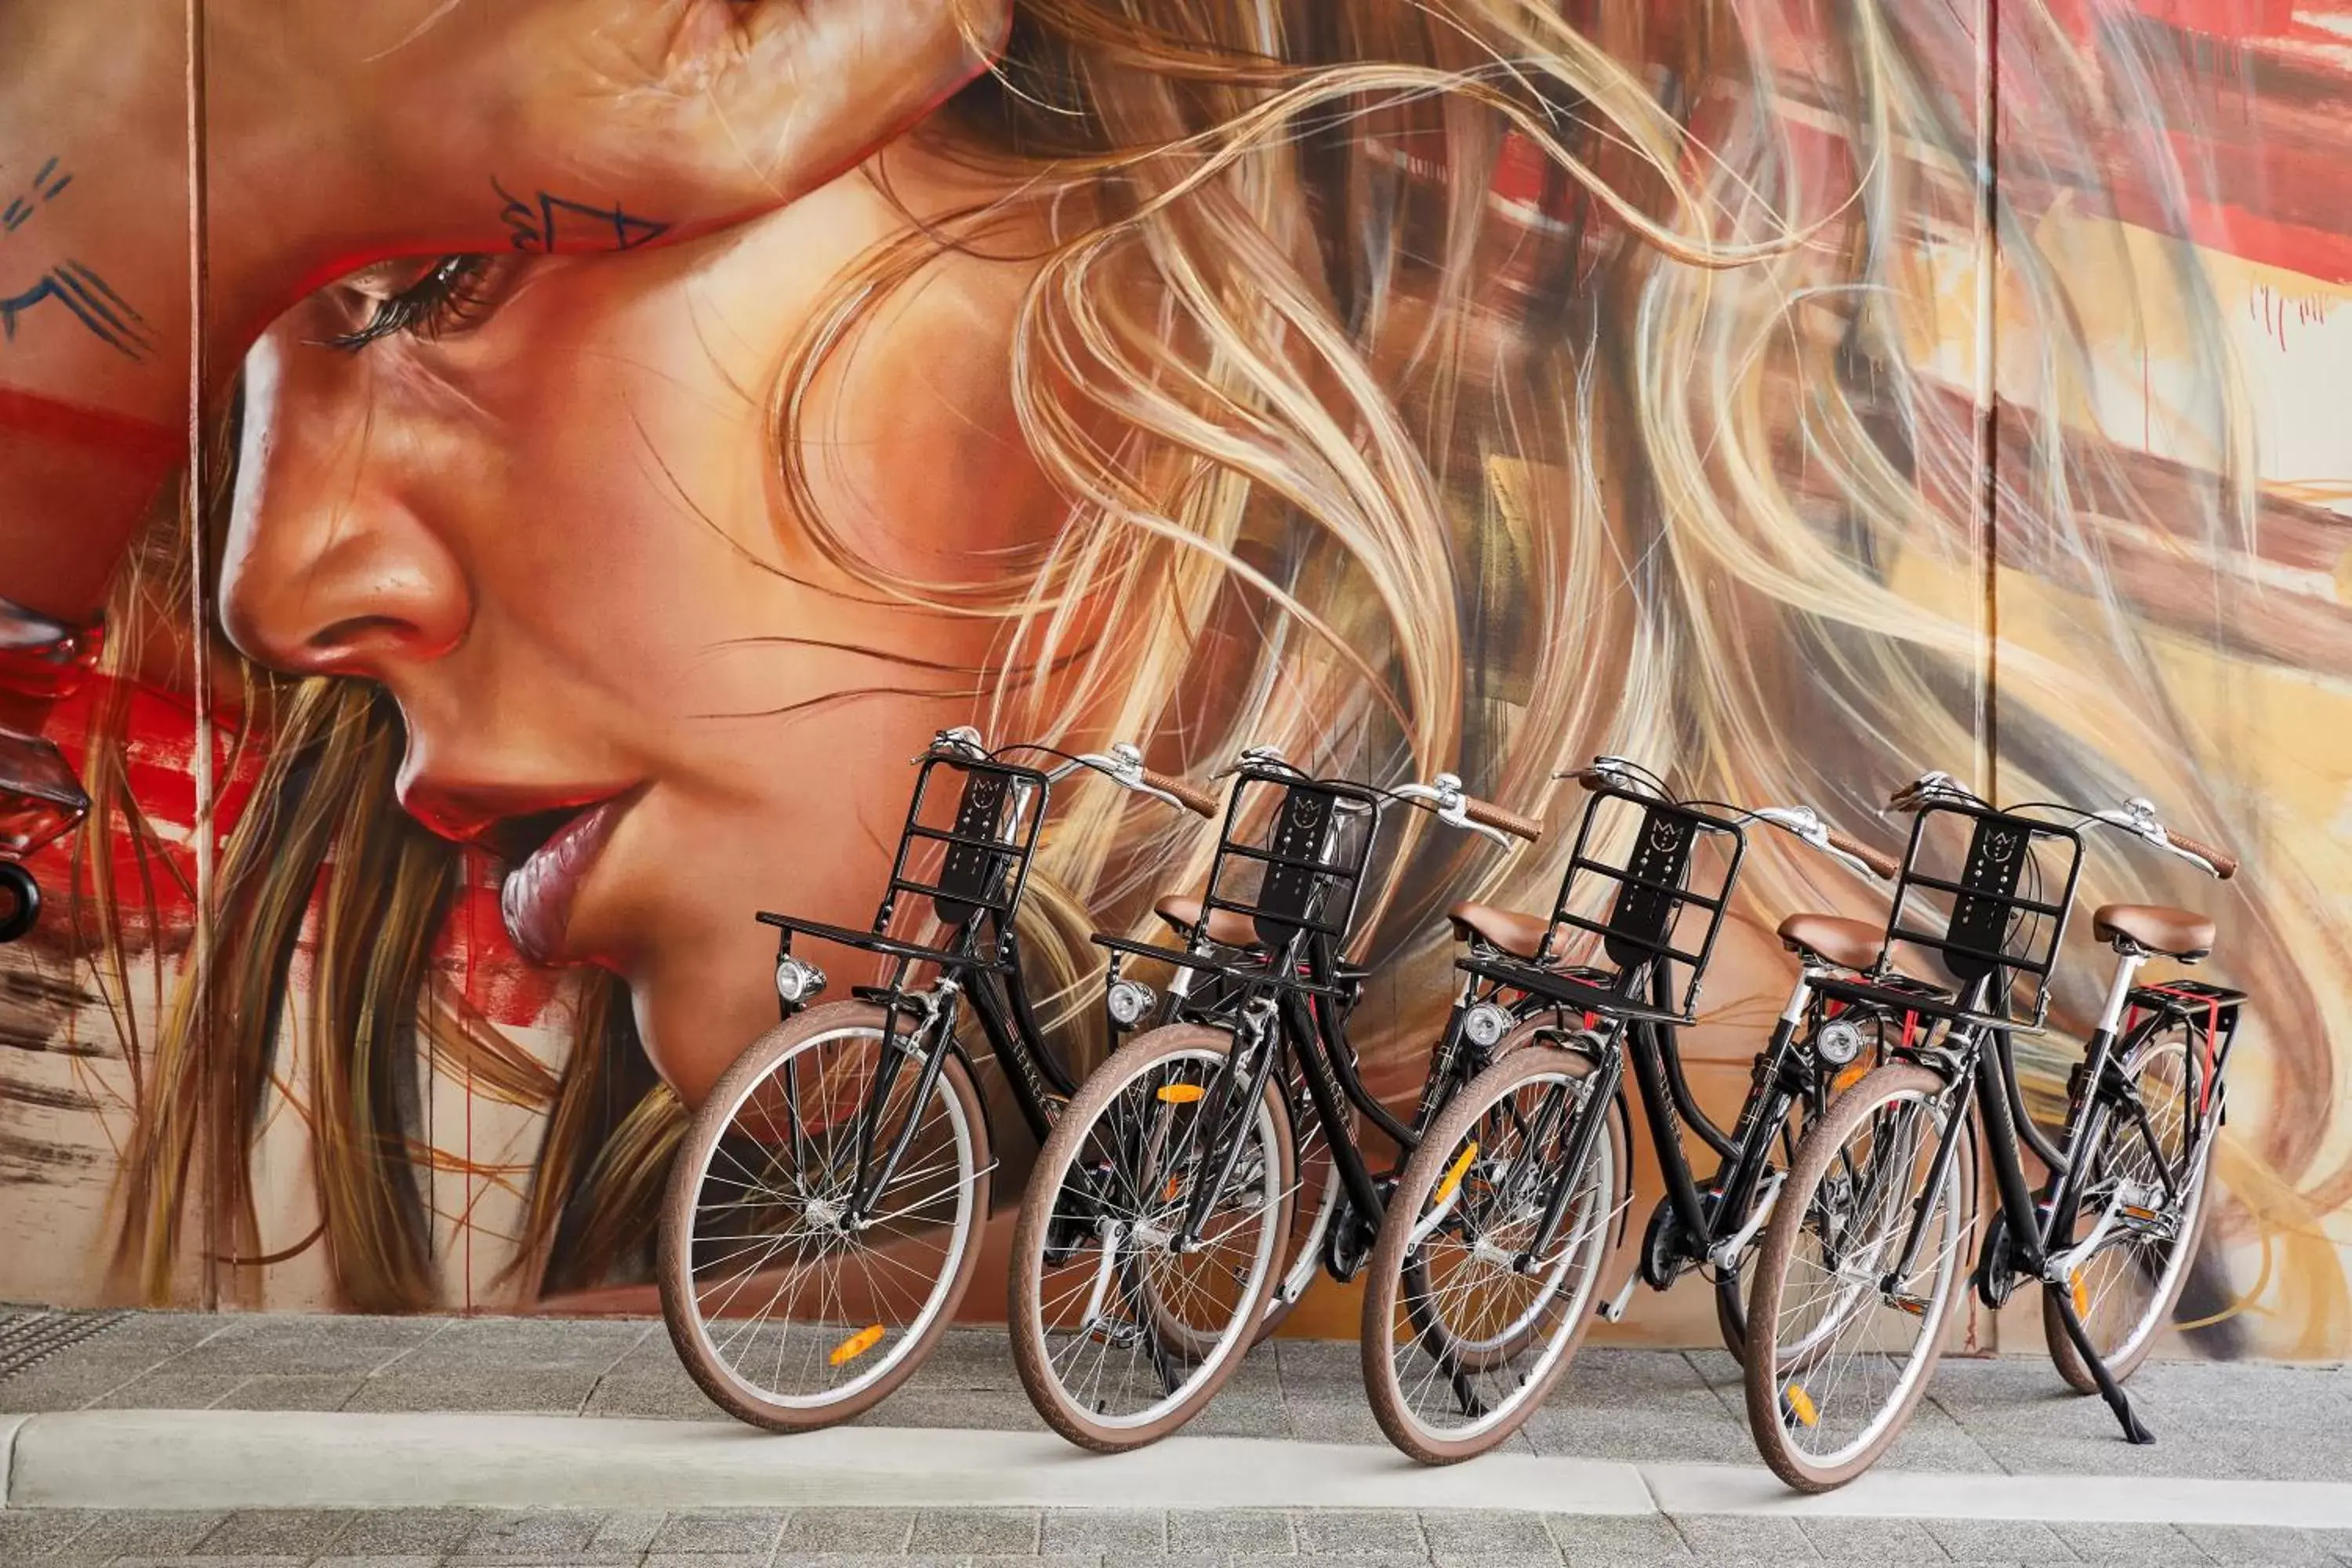 Area and facilities, Biking in Art Series - The Adnate